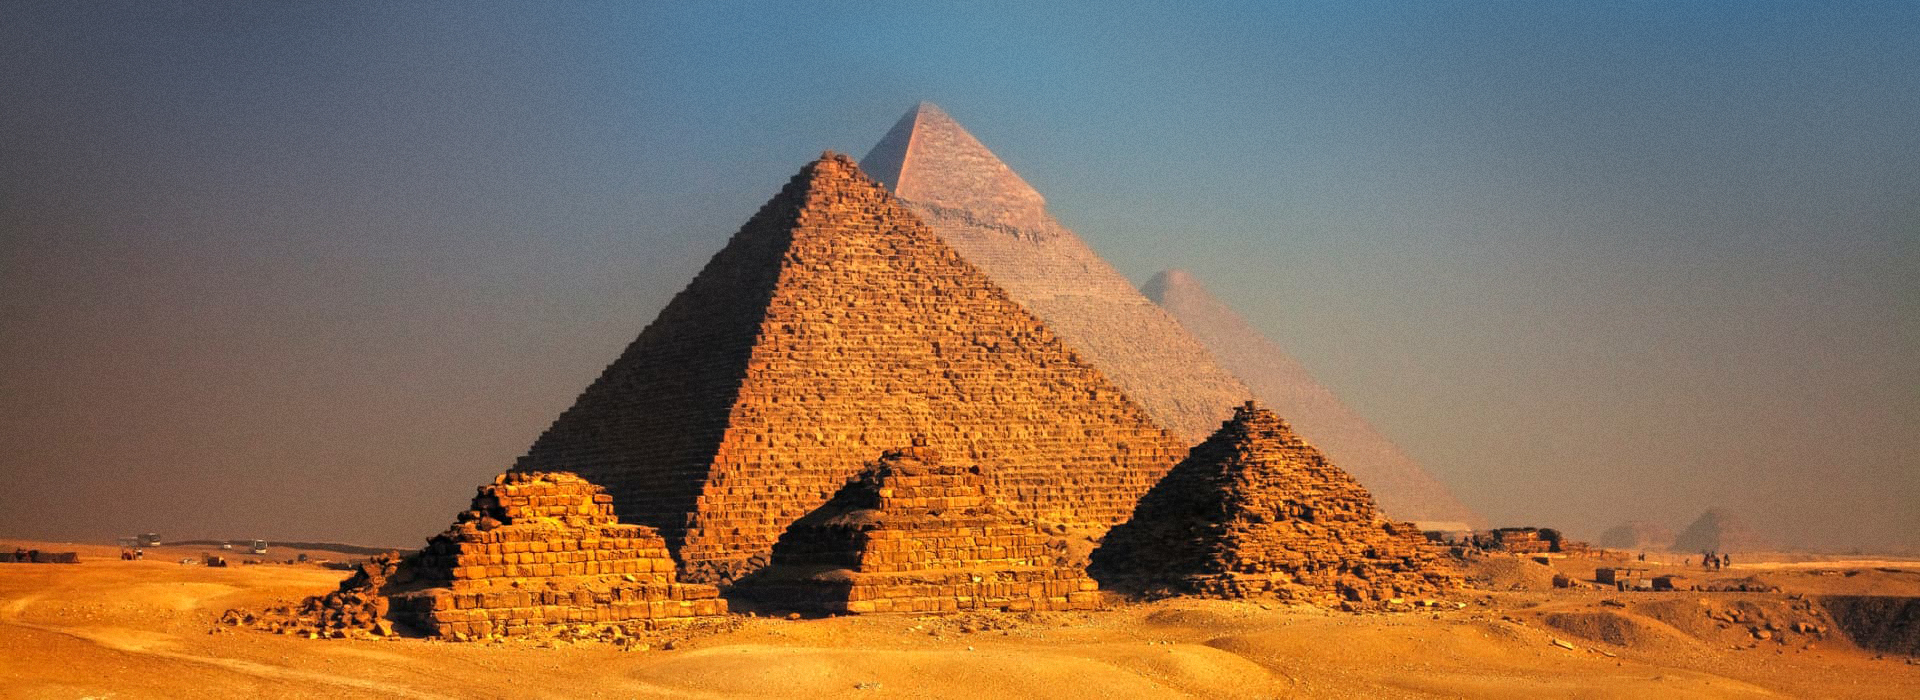 Series poster The Pyramids: Solving the Mystery